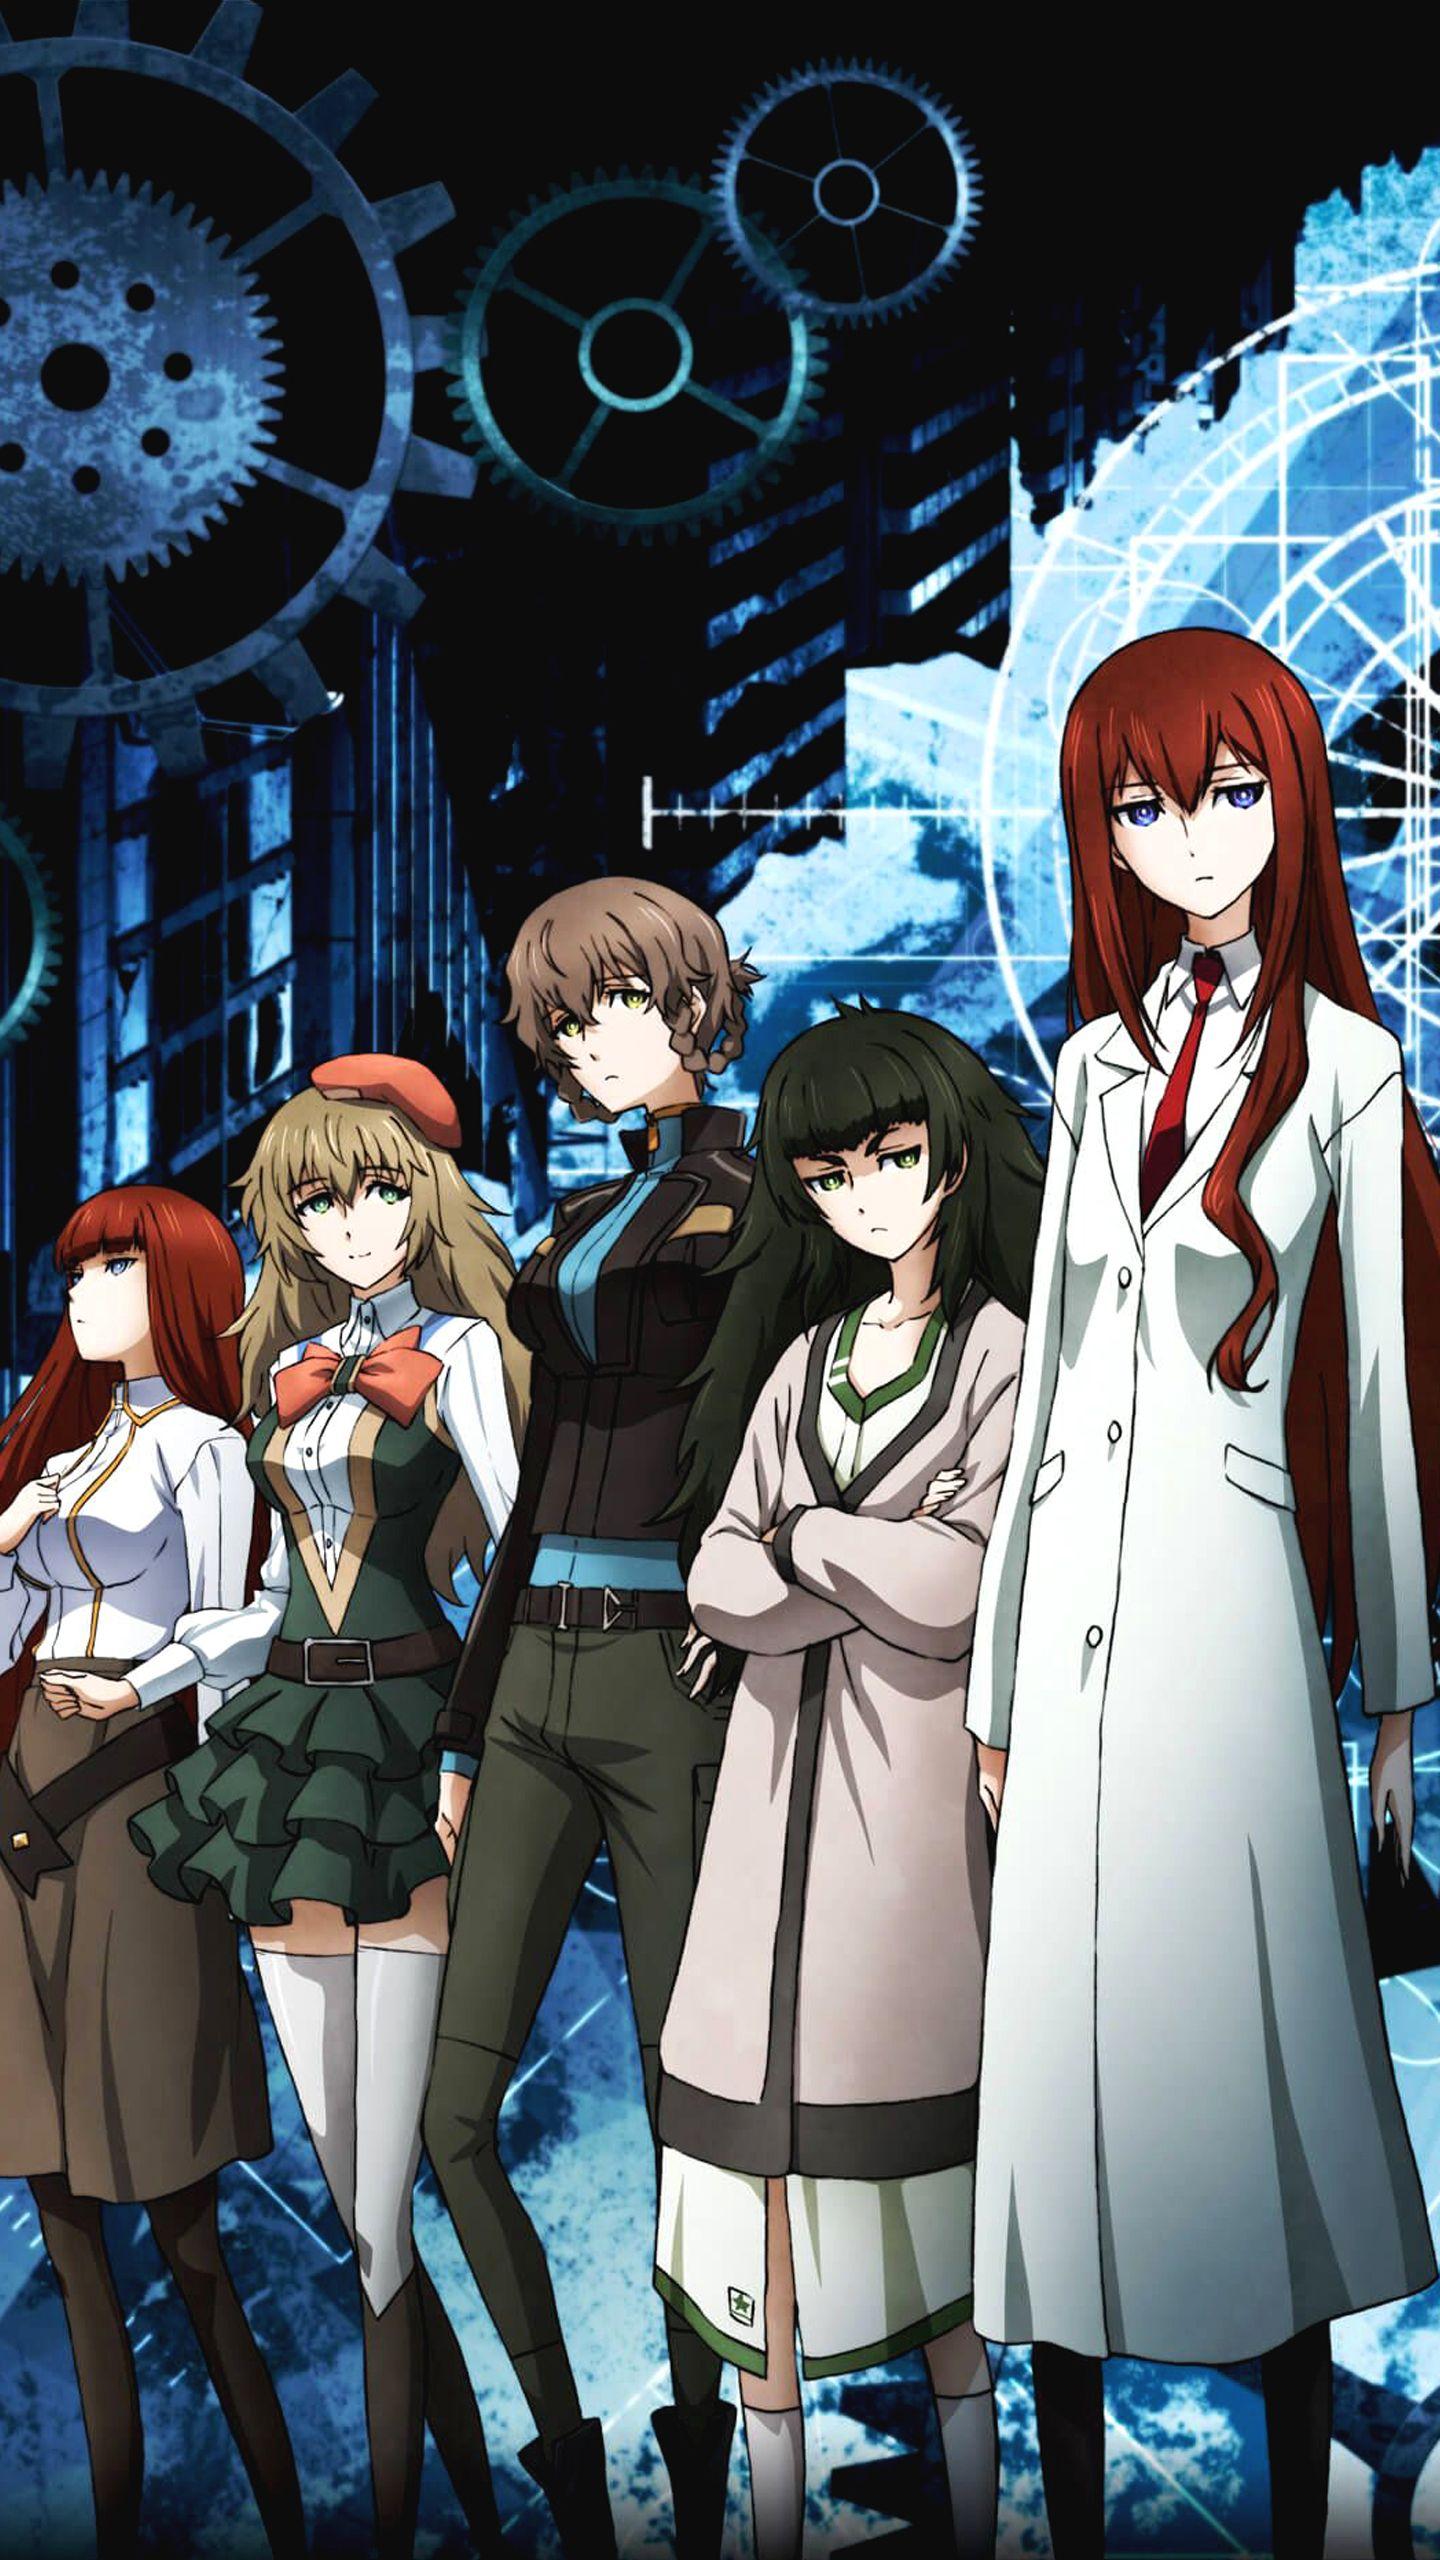 SteinsGate 0 Anime 2nd Cour New Key Visual  rsteinsgate